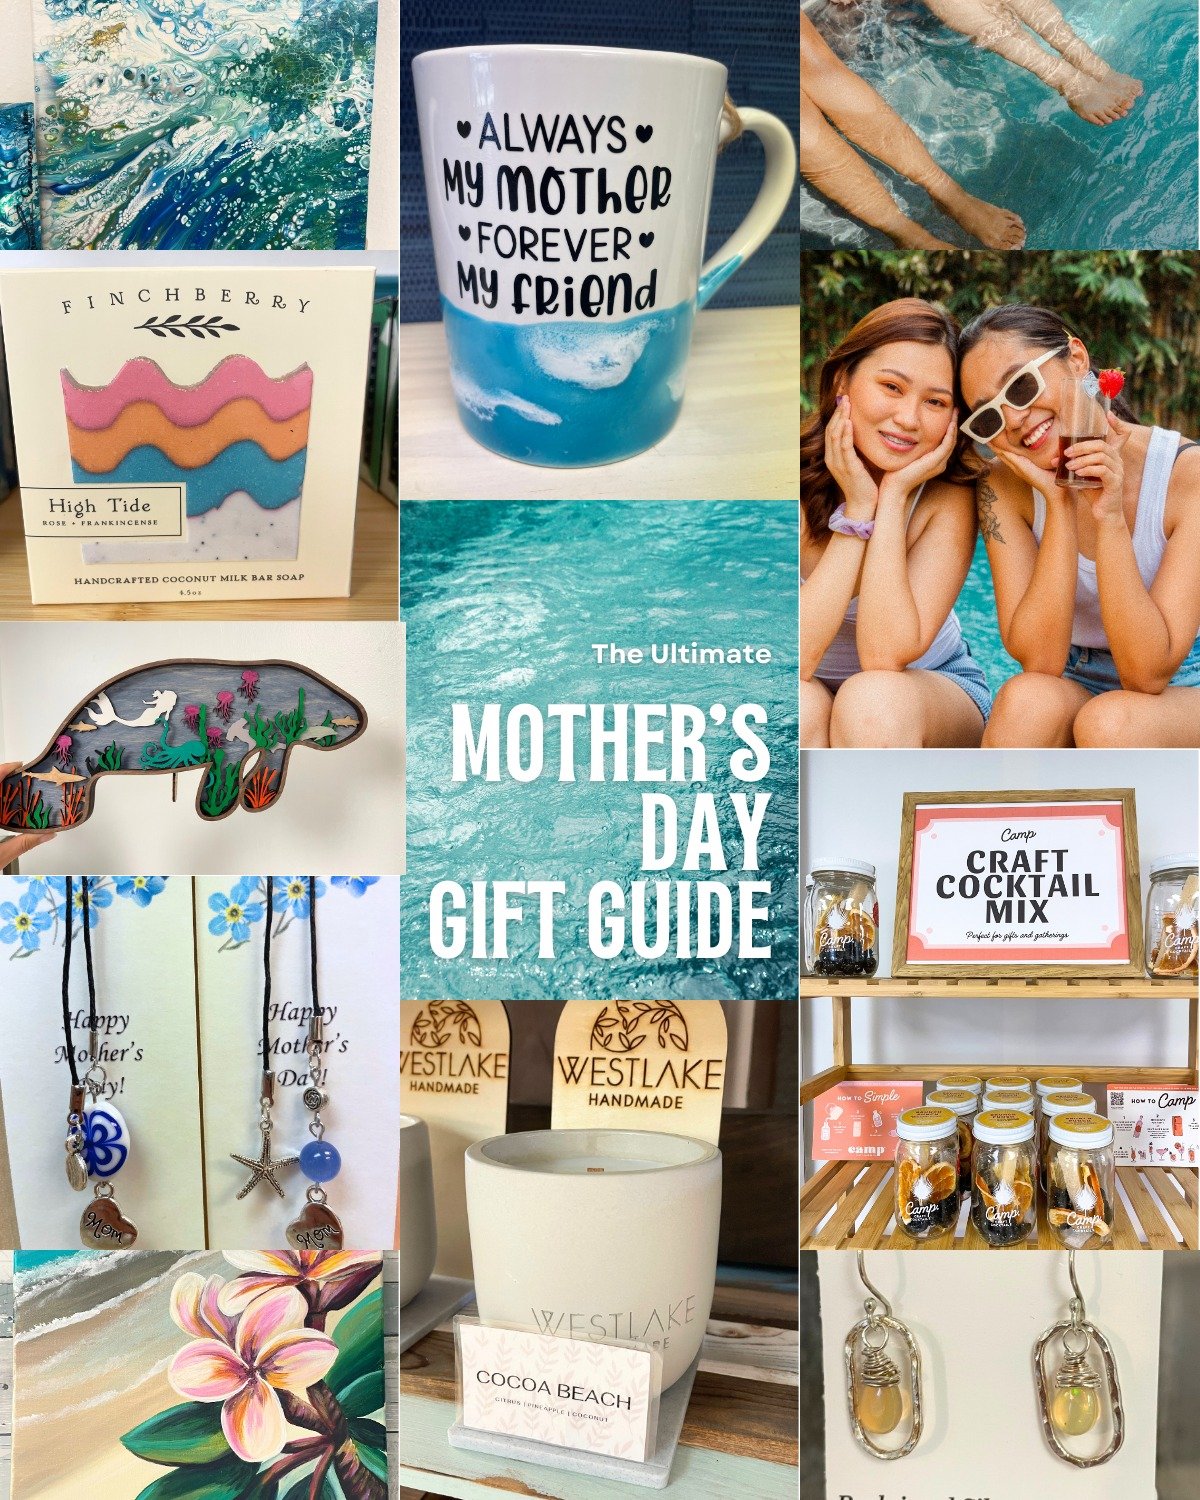 Don't forget! This week is Mother's Day, and we've got the ultimate gift guide for you. From handmade candles to earrings to amazing cocktail mixes and artisan soaps, you're sure to find mom the perfect and unique gift💙💐